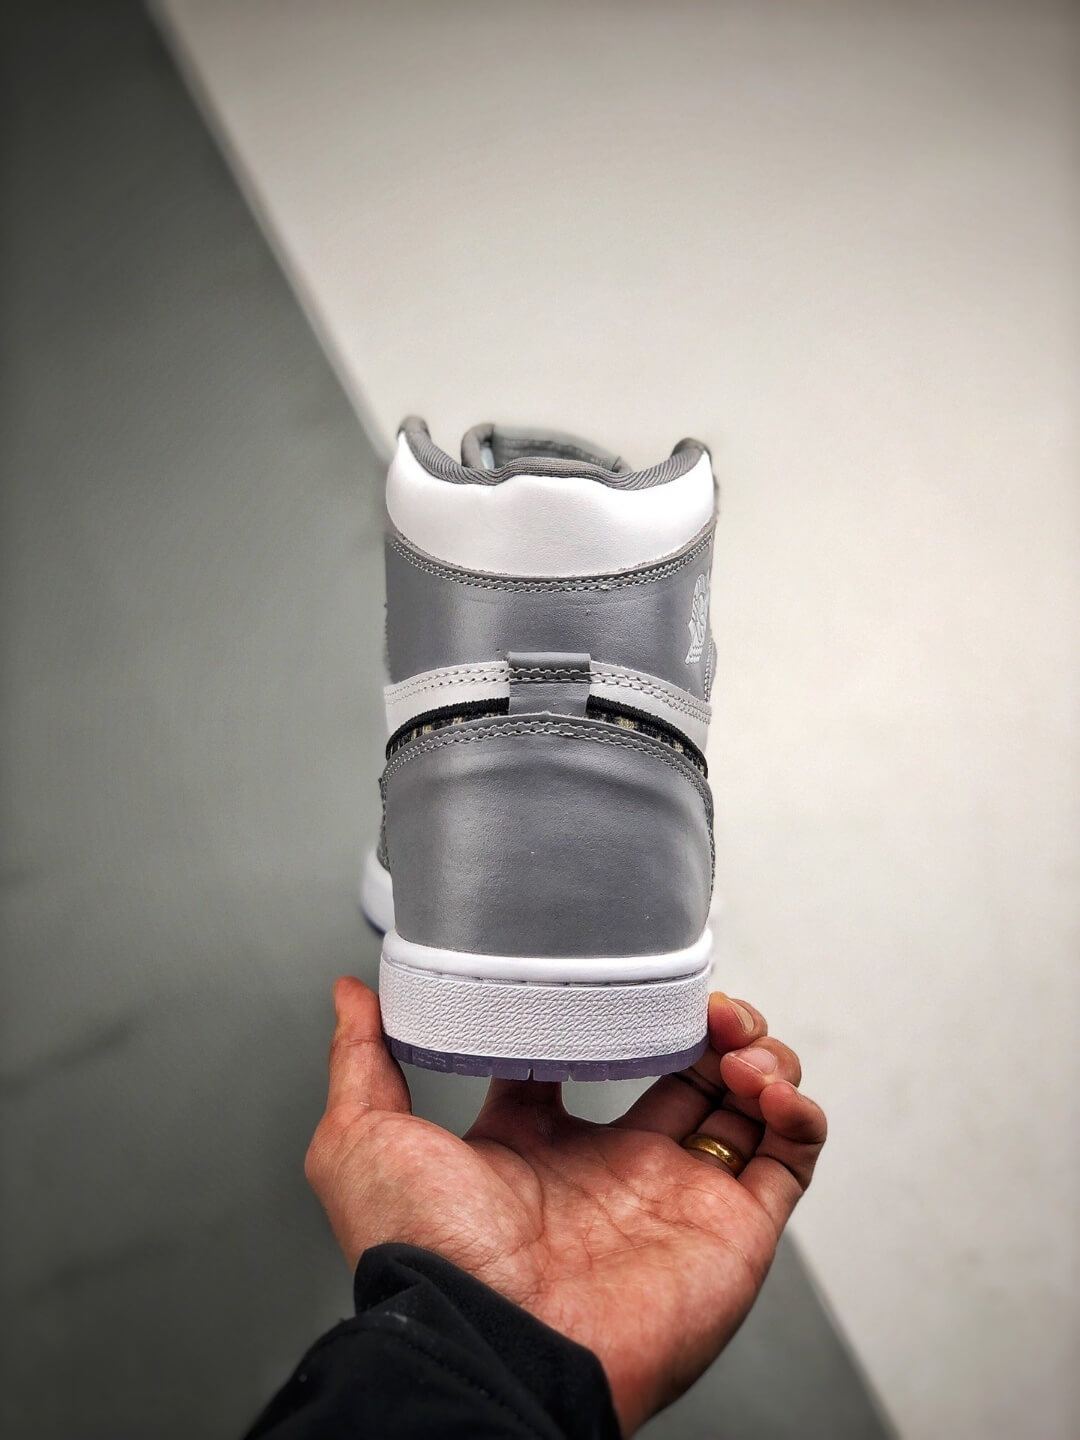 The Dior x Air Jordan 1 High Sneaker White and Grey Upper Top RepShoes 06